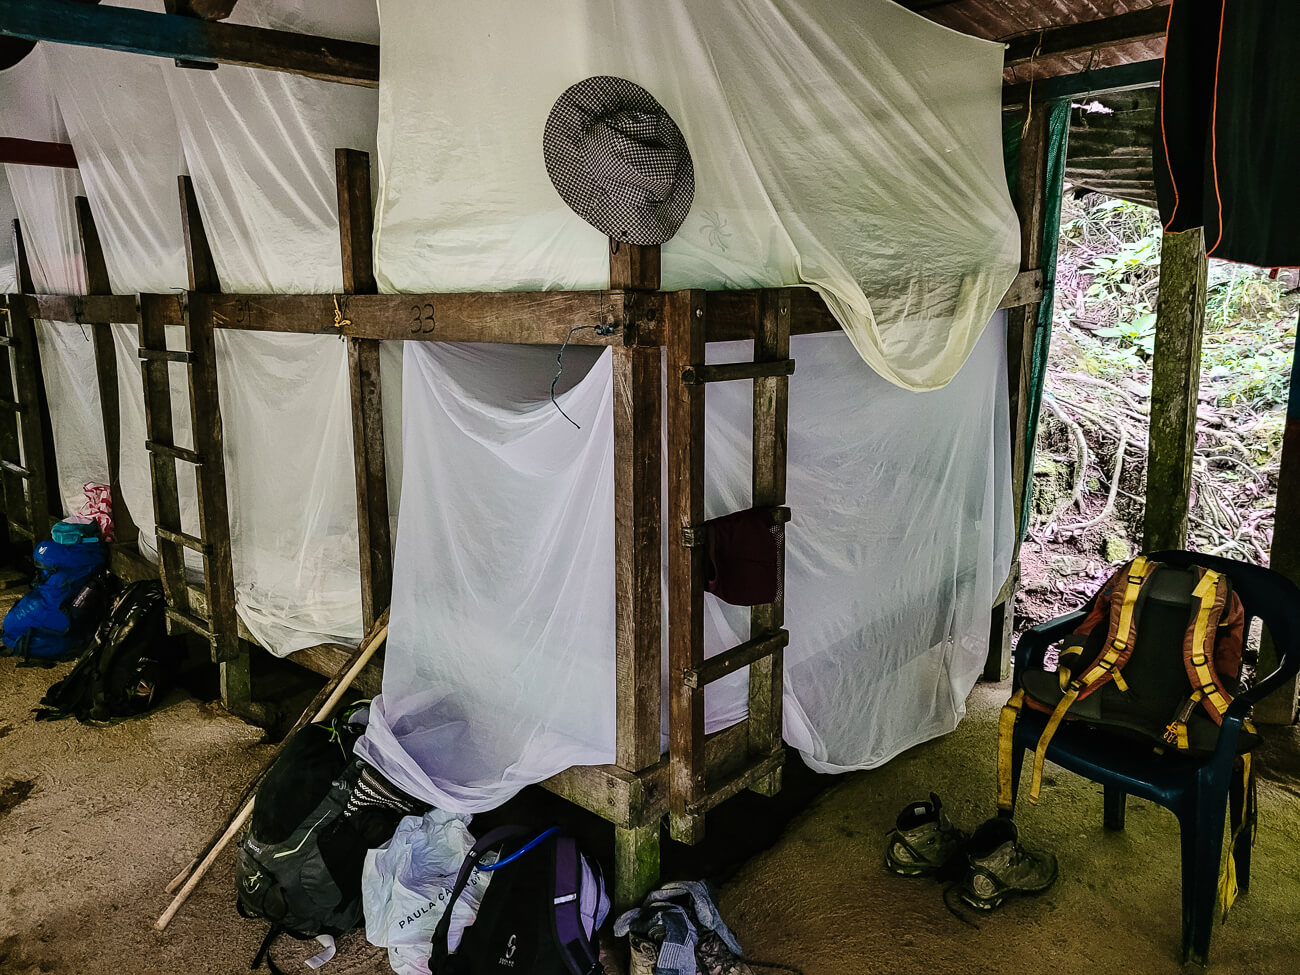 bunkbeds during ciudad perdida hike in Colombia